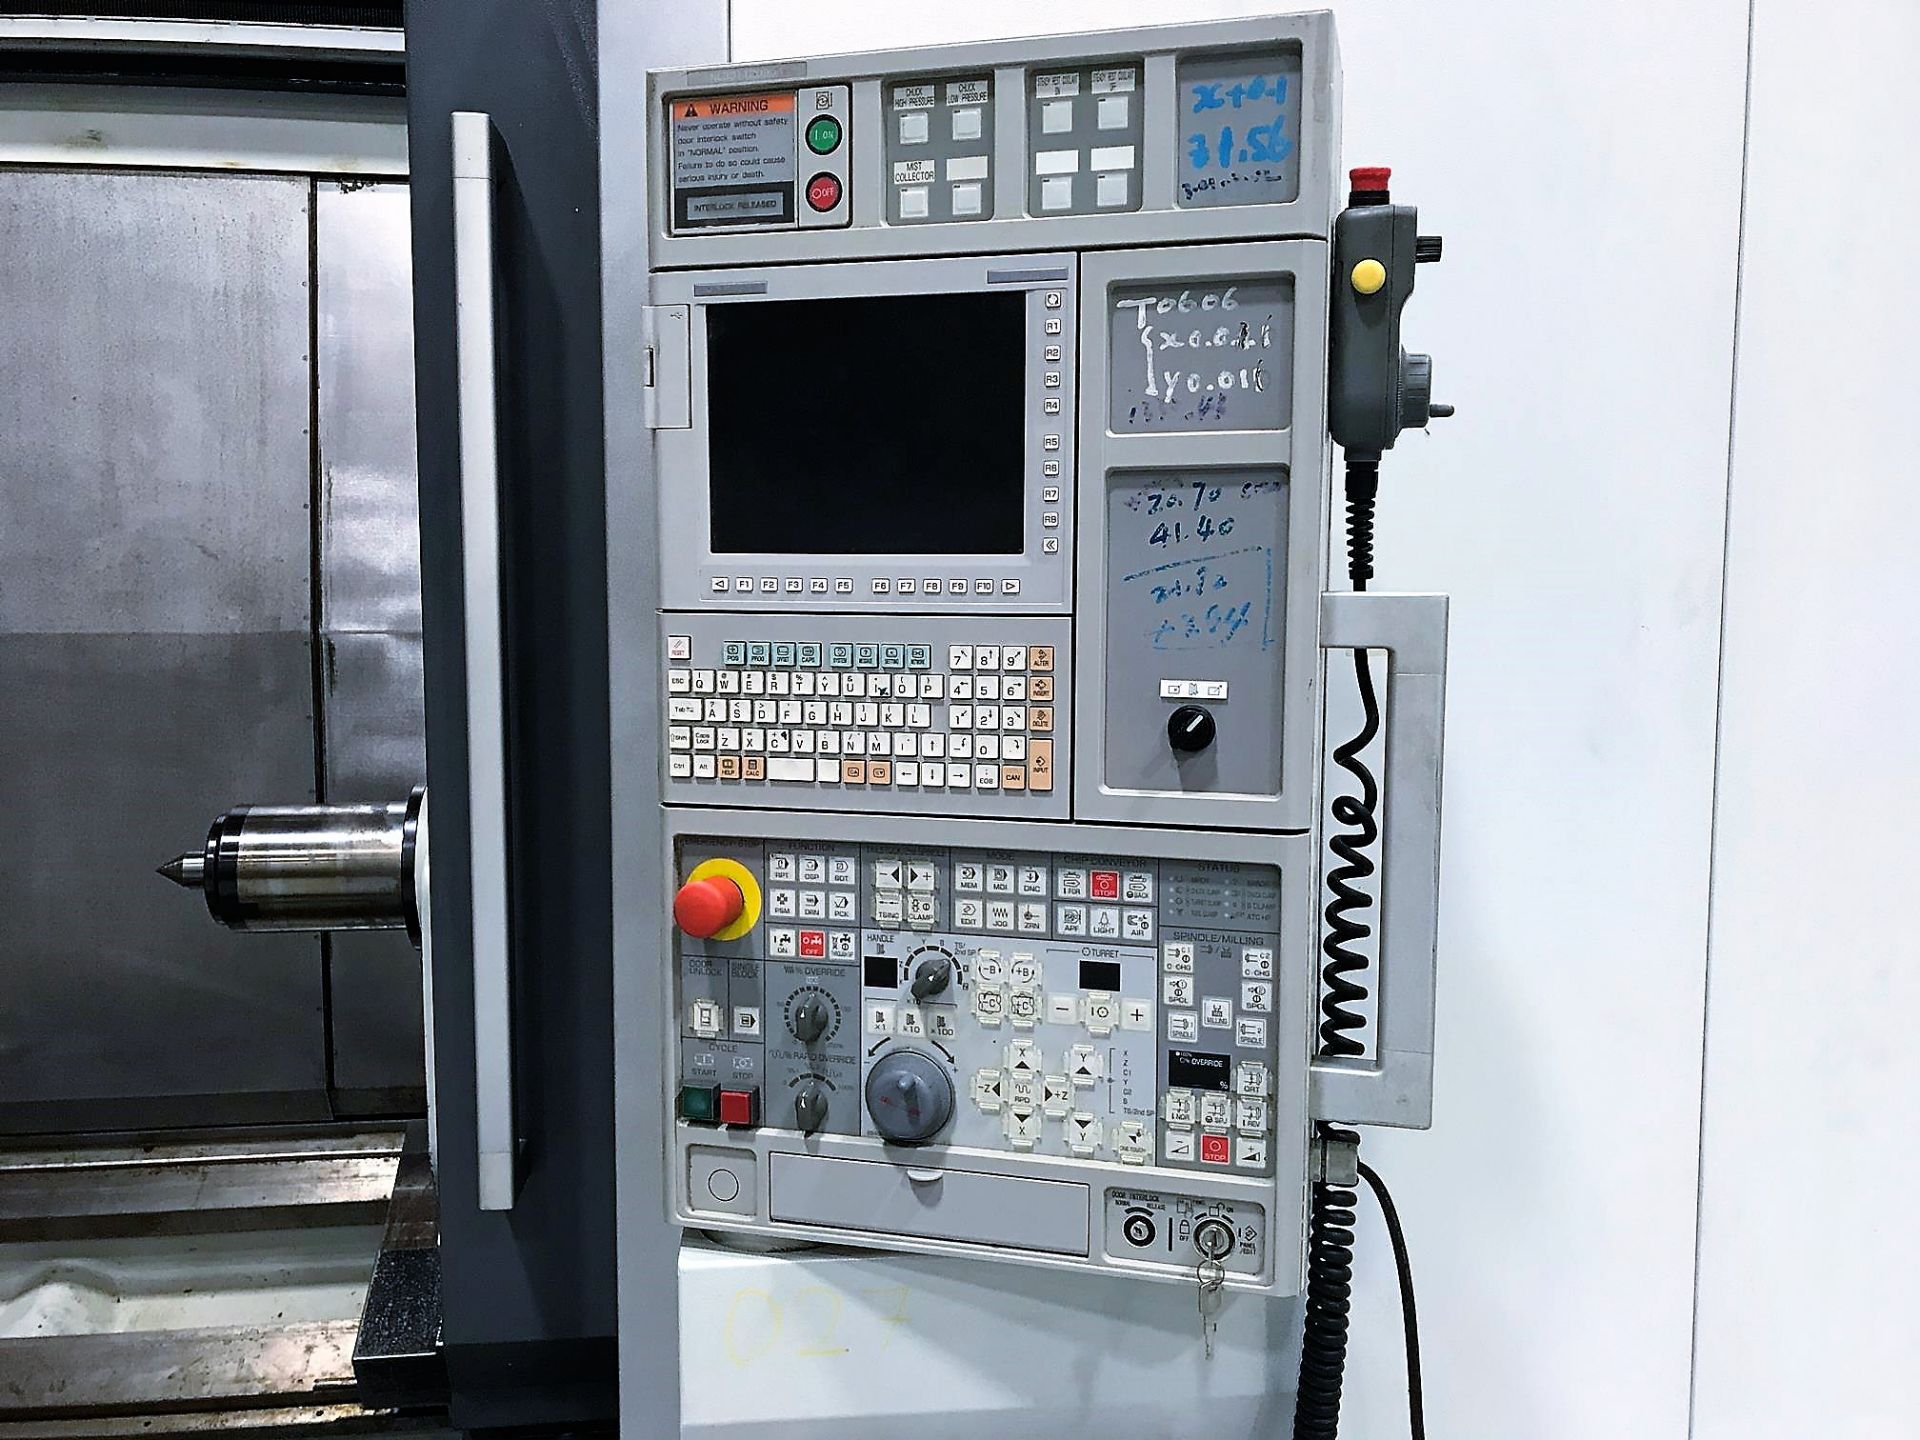 16.5" x 120" Mori Seiki NL3000Y/3000 CNC Turning Center Lathe w/Milling & Y-Axis, S/N 11986, New 201 - Image 3 of 17